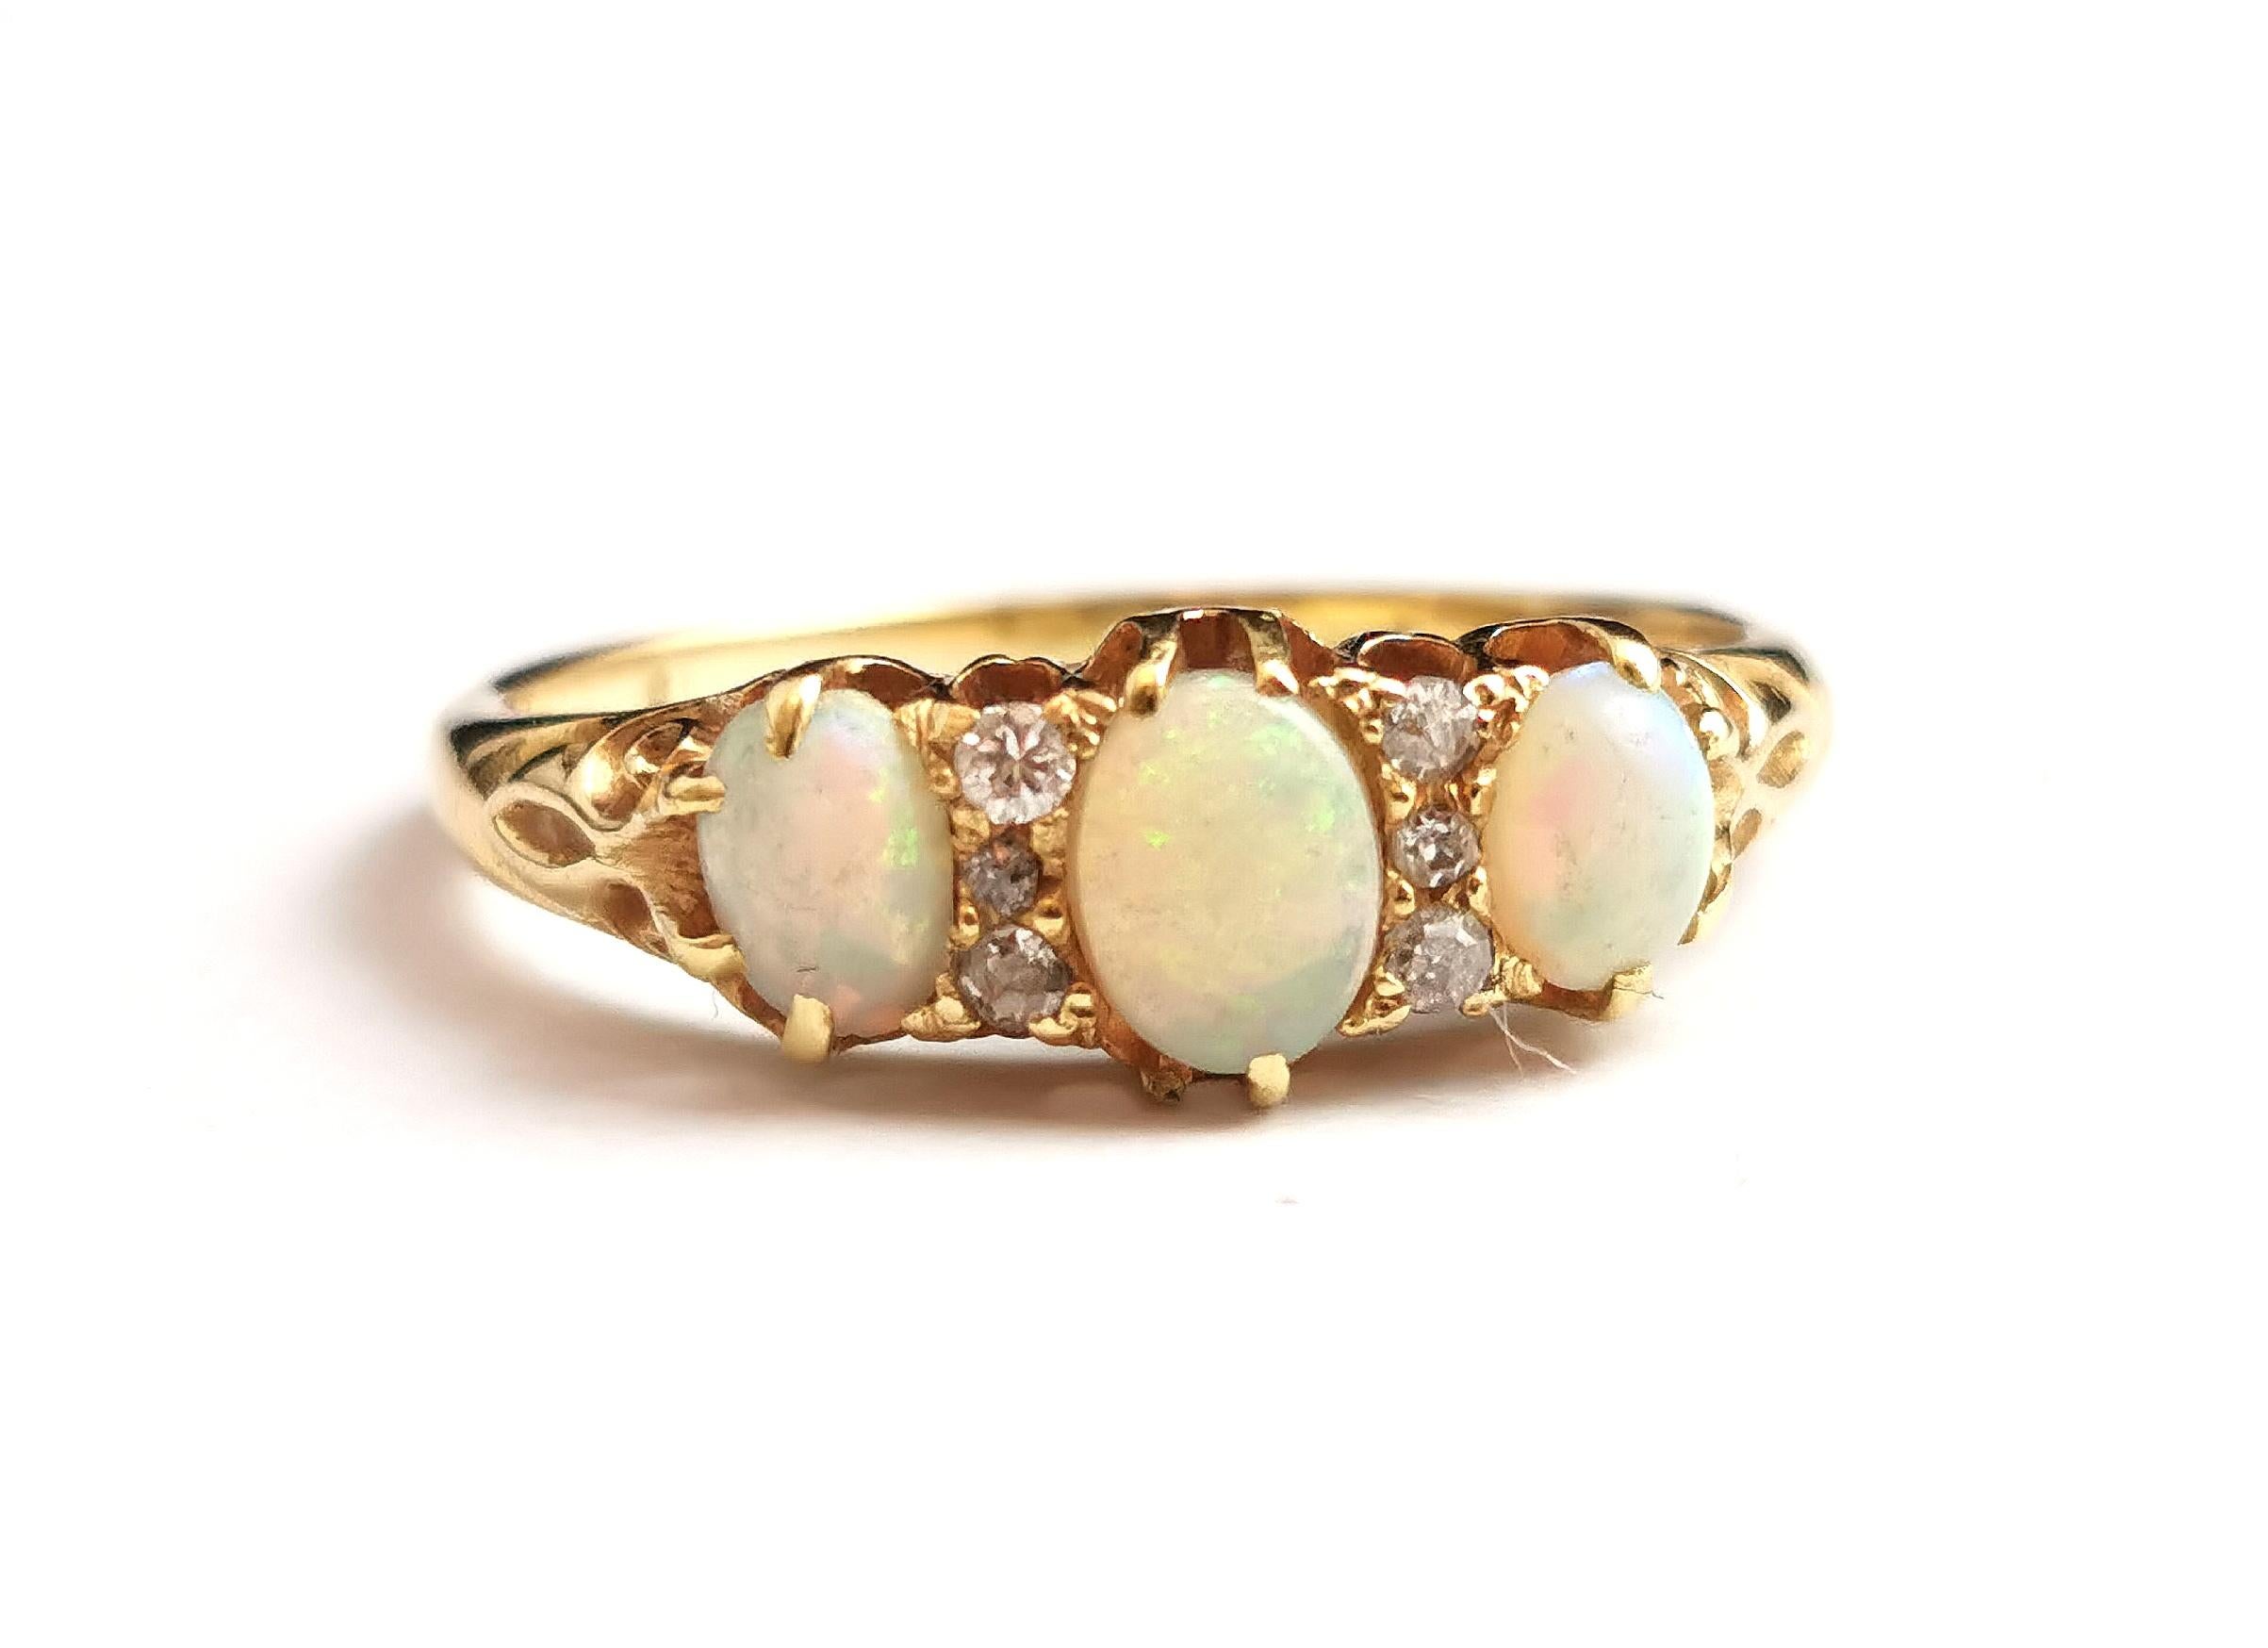 Antique Opal and Diamond ring, 18k yellow gold, Edwardian  7